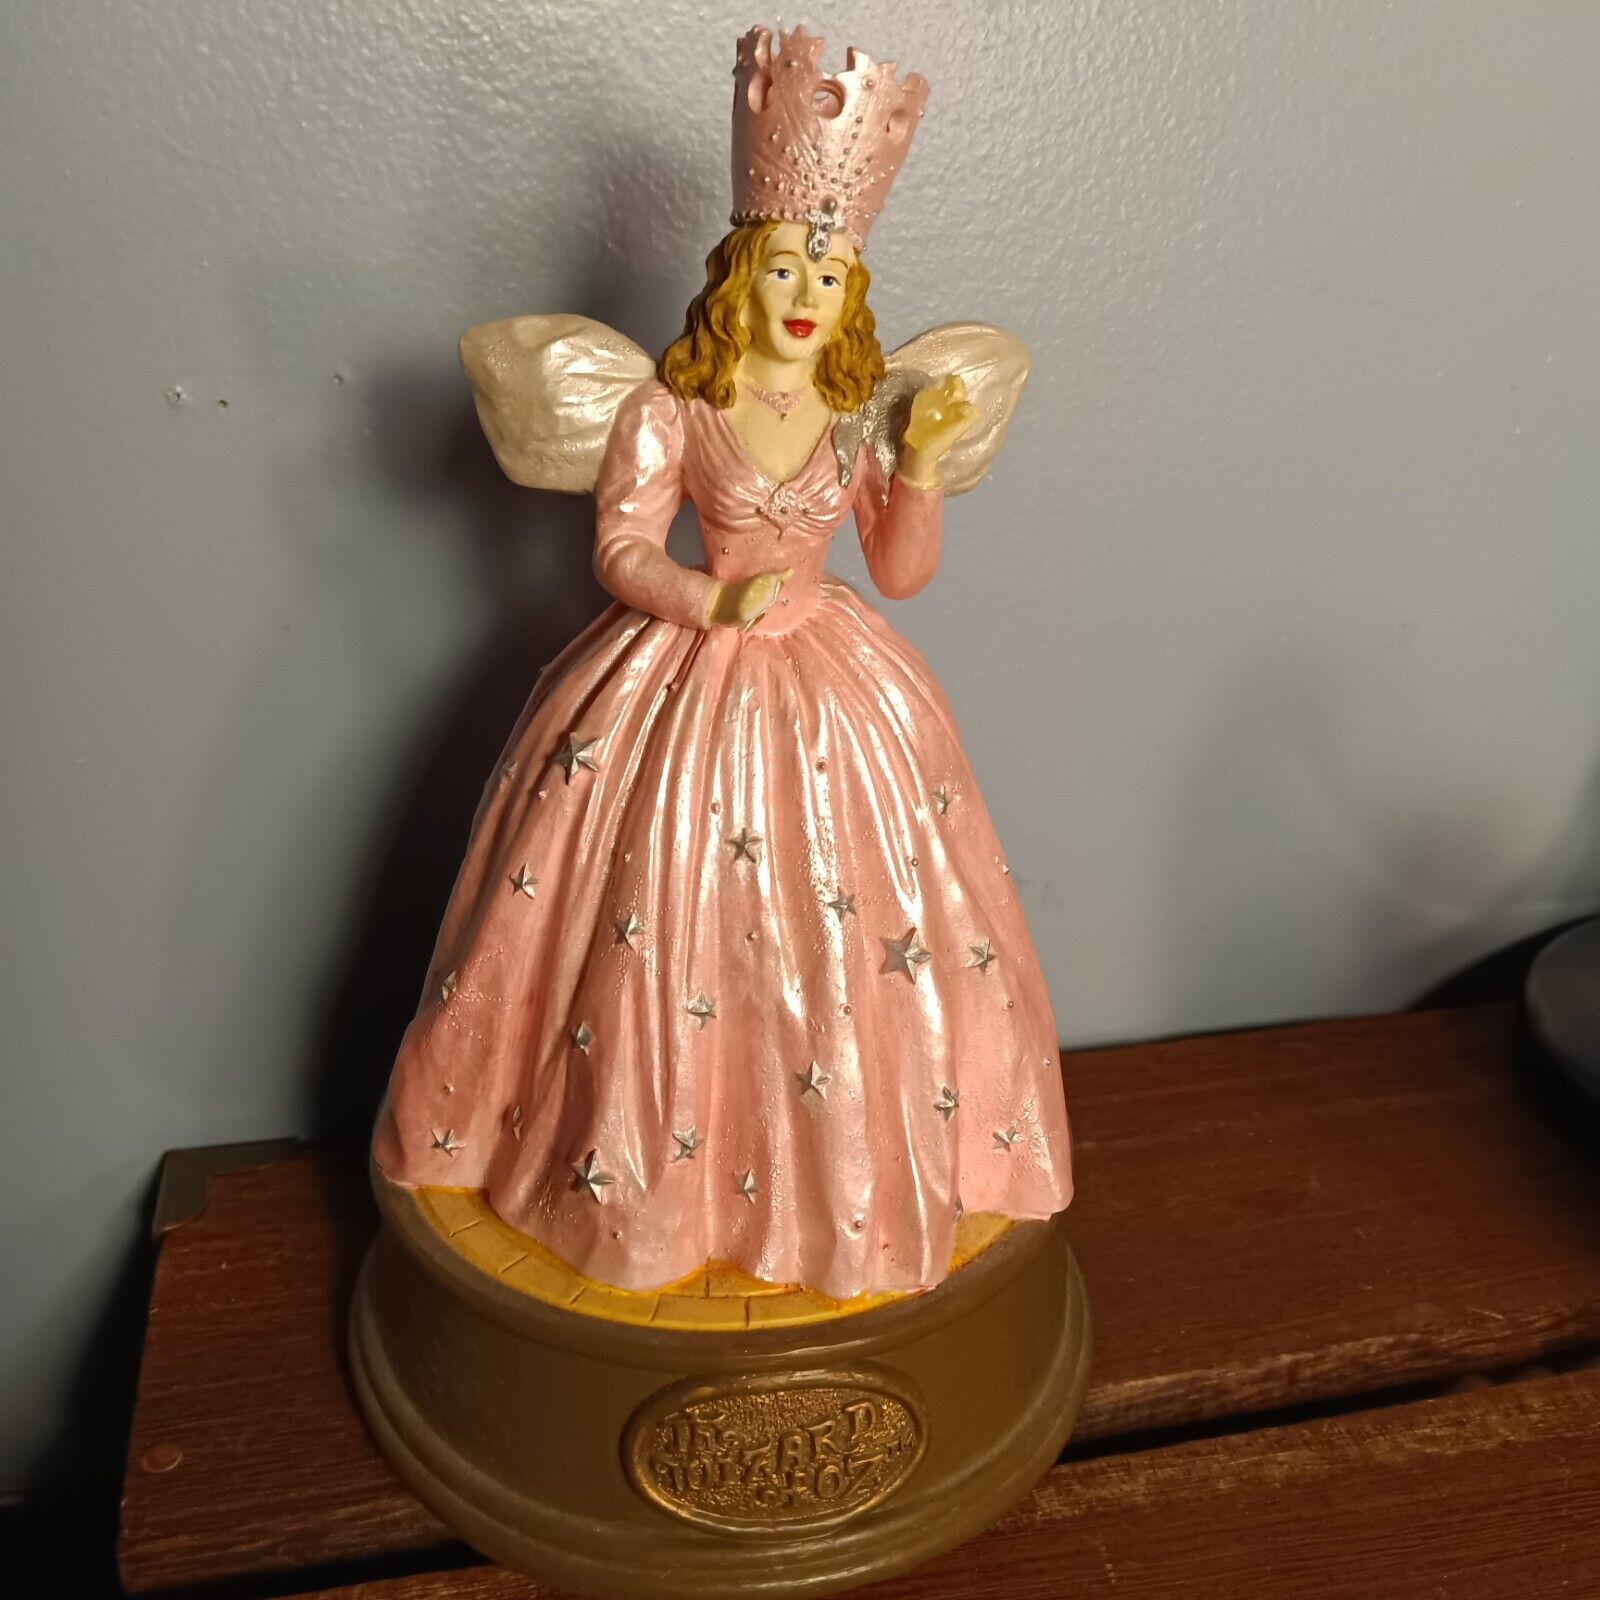 Vintage Glenda The Good Witch Musical Figurine, 1996, The Wizard of Oz